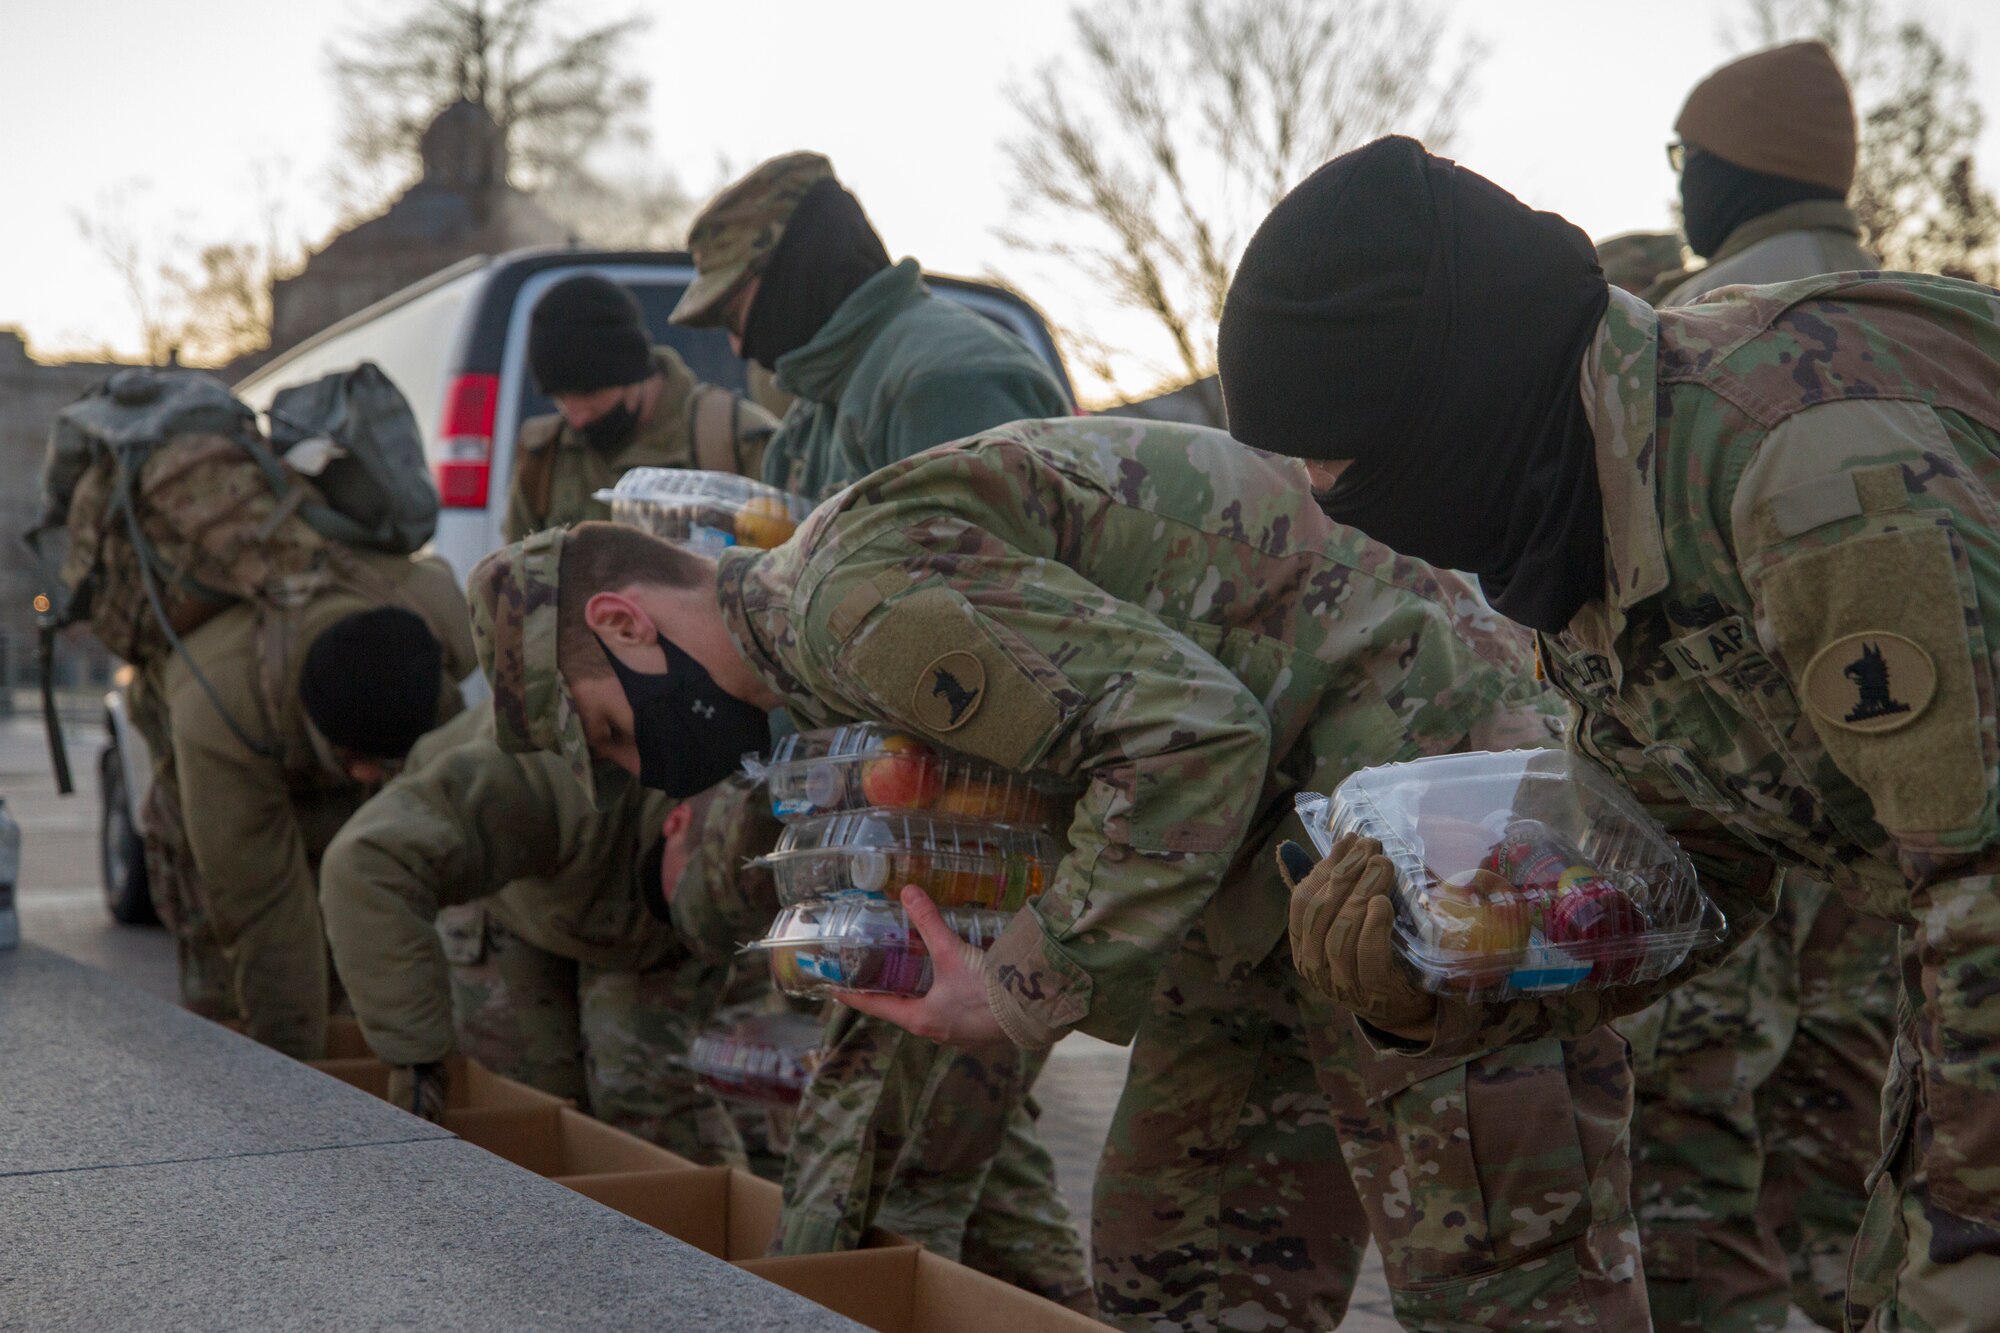 Soldiers and Airmen with the Delaware National Guard grab breakfast boxes while on duty near the U.S. Capitol, Jan. 12, 2021. National Guard officials are stressing that the Soldiers and Airmen from all 50 states, three territories and Washington, D.C., are receiving adequate food and lodging as they continue to support federal and local authorities leading up to the 59th presidential inauguration.